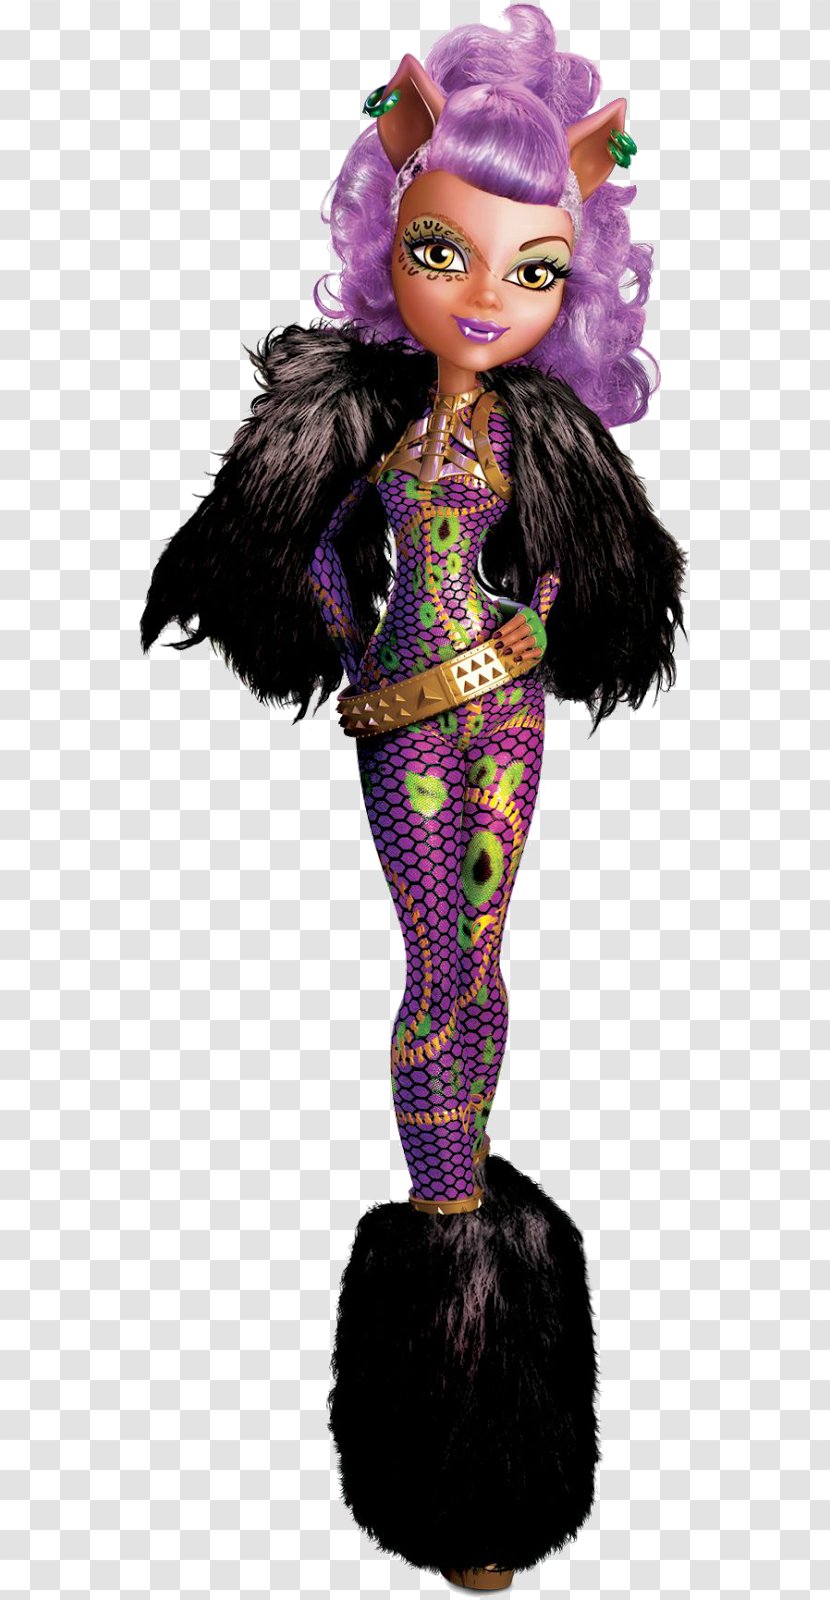 Monster High: Ghouls Rule Clawdeen Wolf Howleen Frankie Stein Cleo DeNile - Evan Smith - Doll Transparent PNG